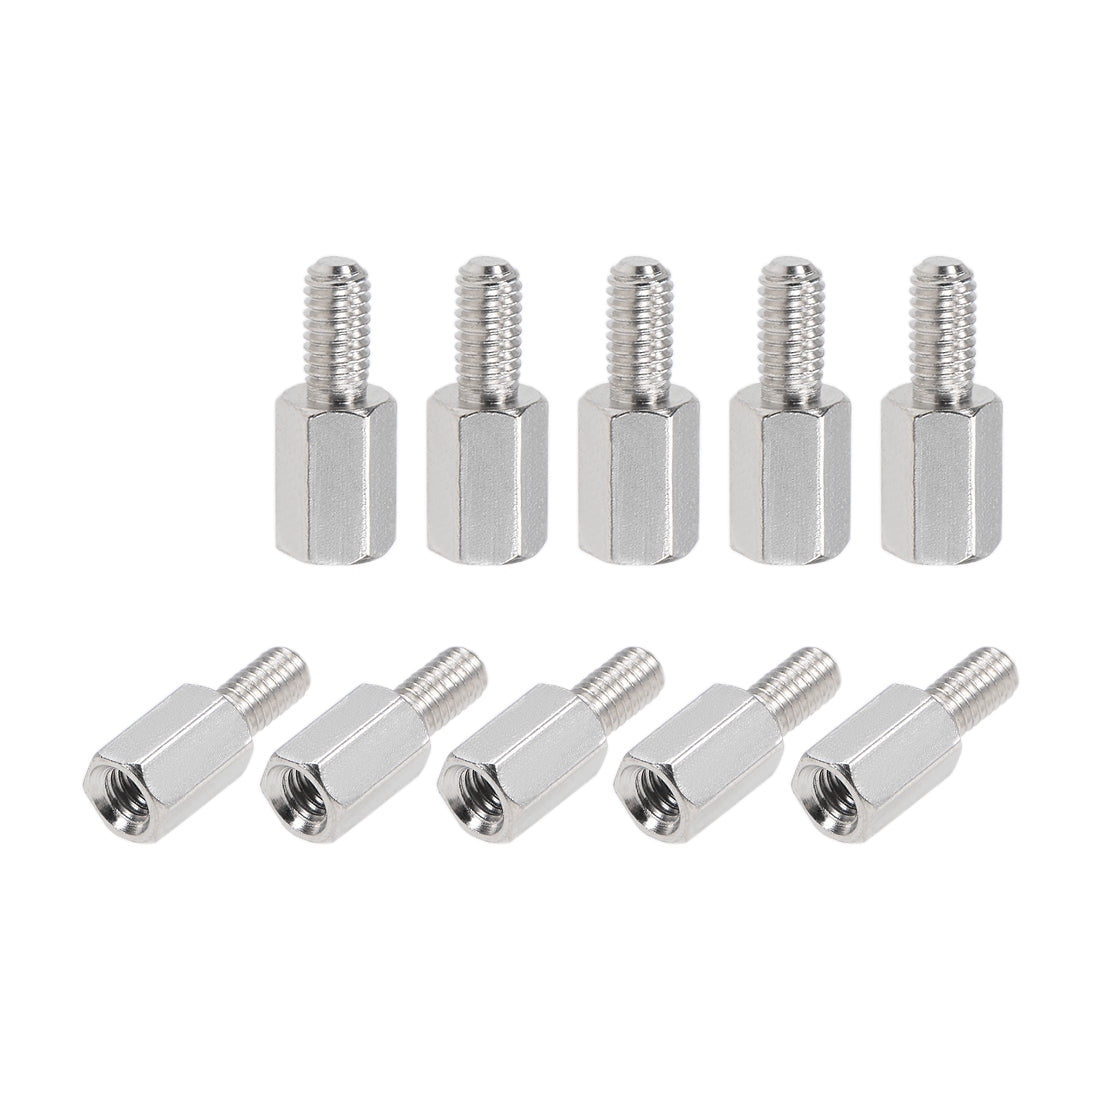 Uxcell M3 x 45 mm + 6 mm Male to Female Hex Nickel Plated Spacer